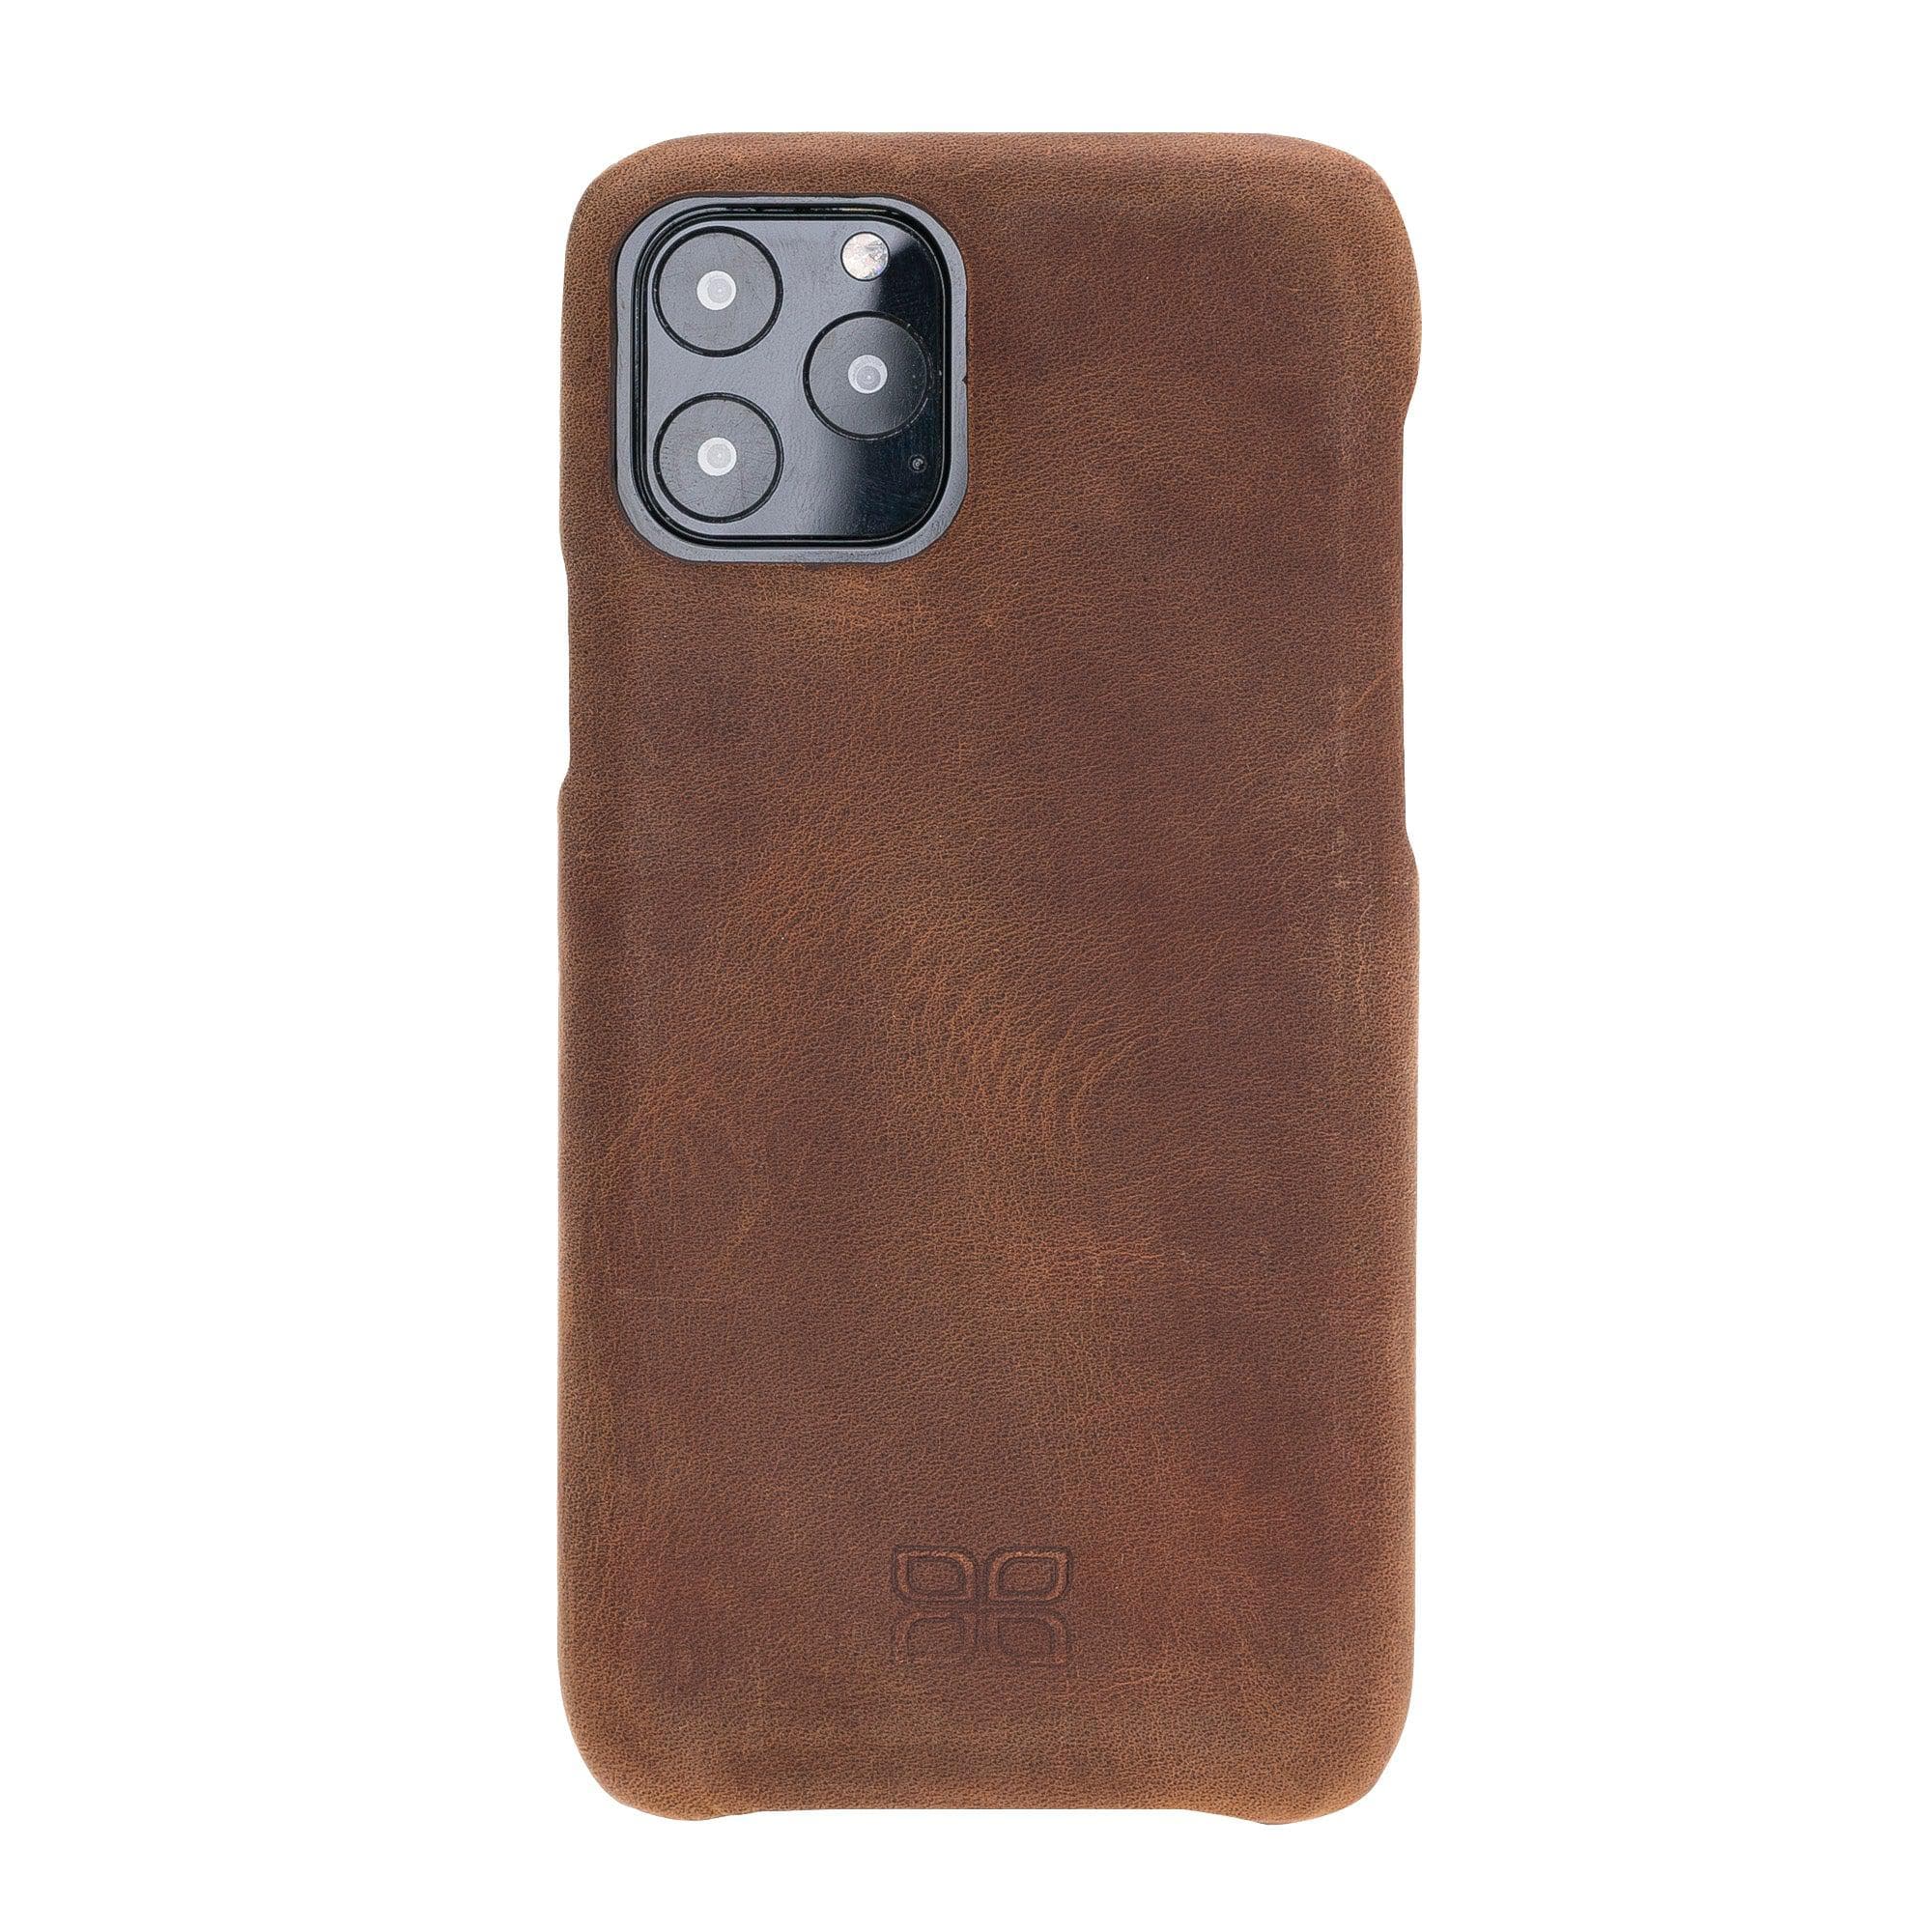 Bouletta Fully Leather Back Cover for Apple iPhone 11 Series İPhone 11 / Antic Brown Bouletta LTD